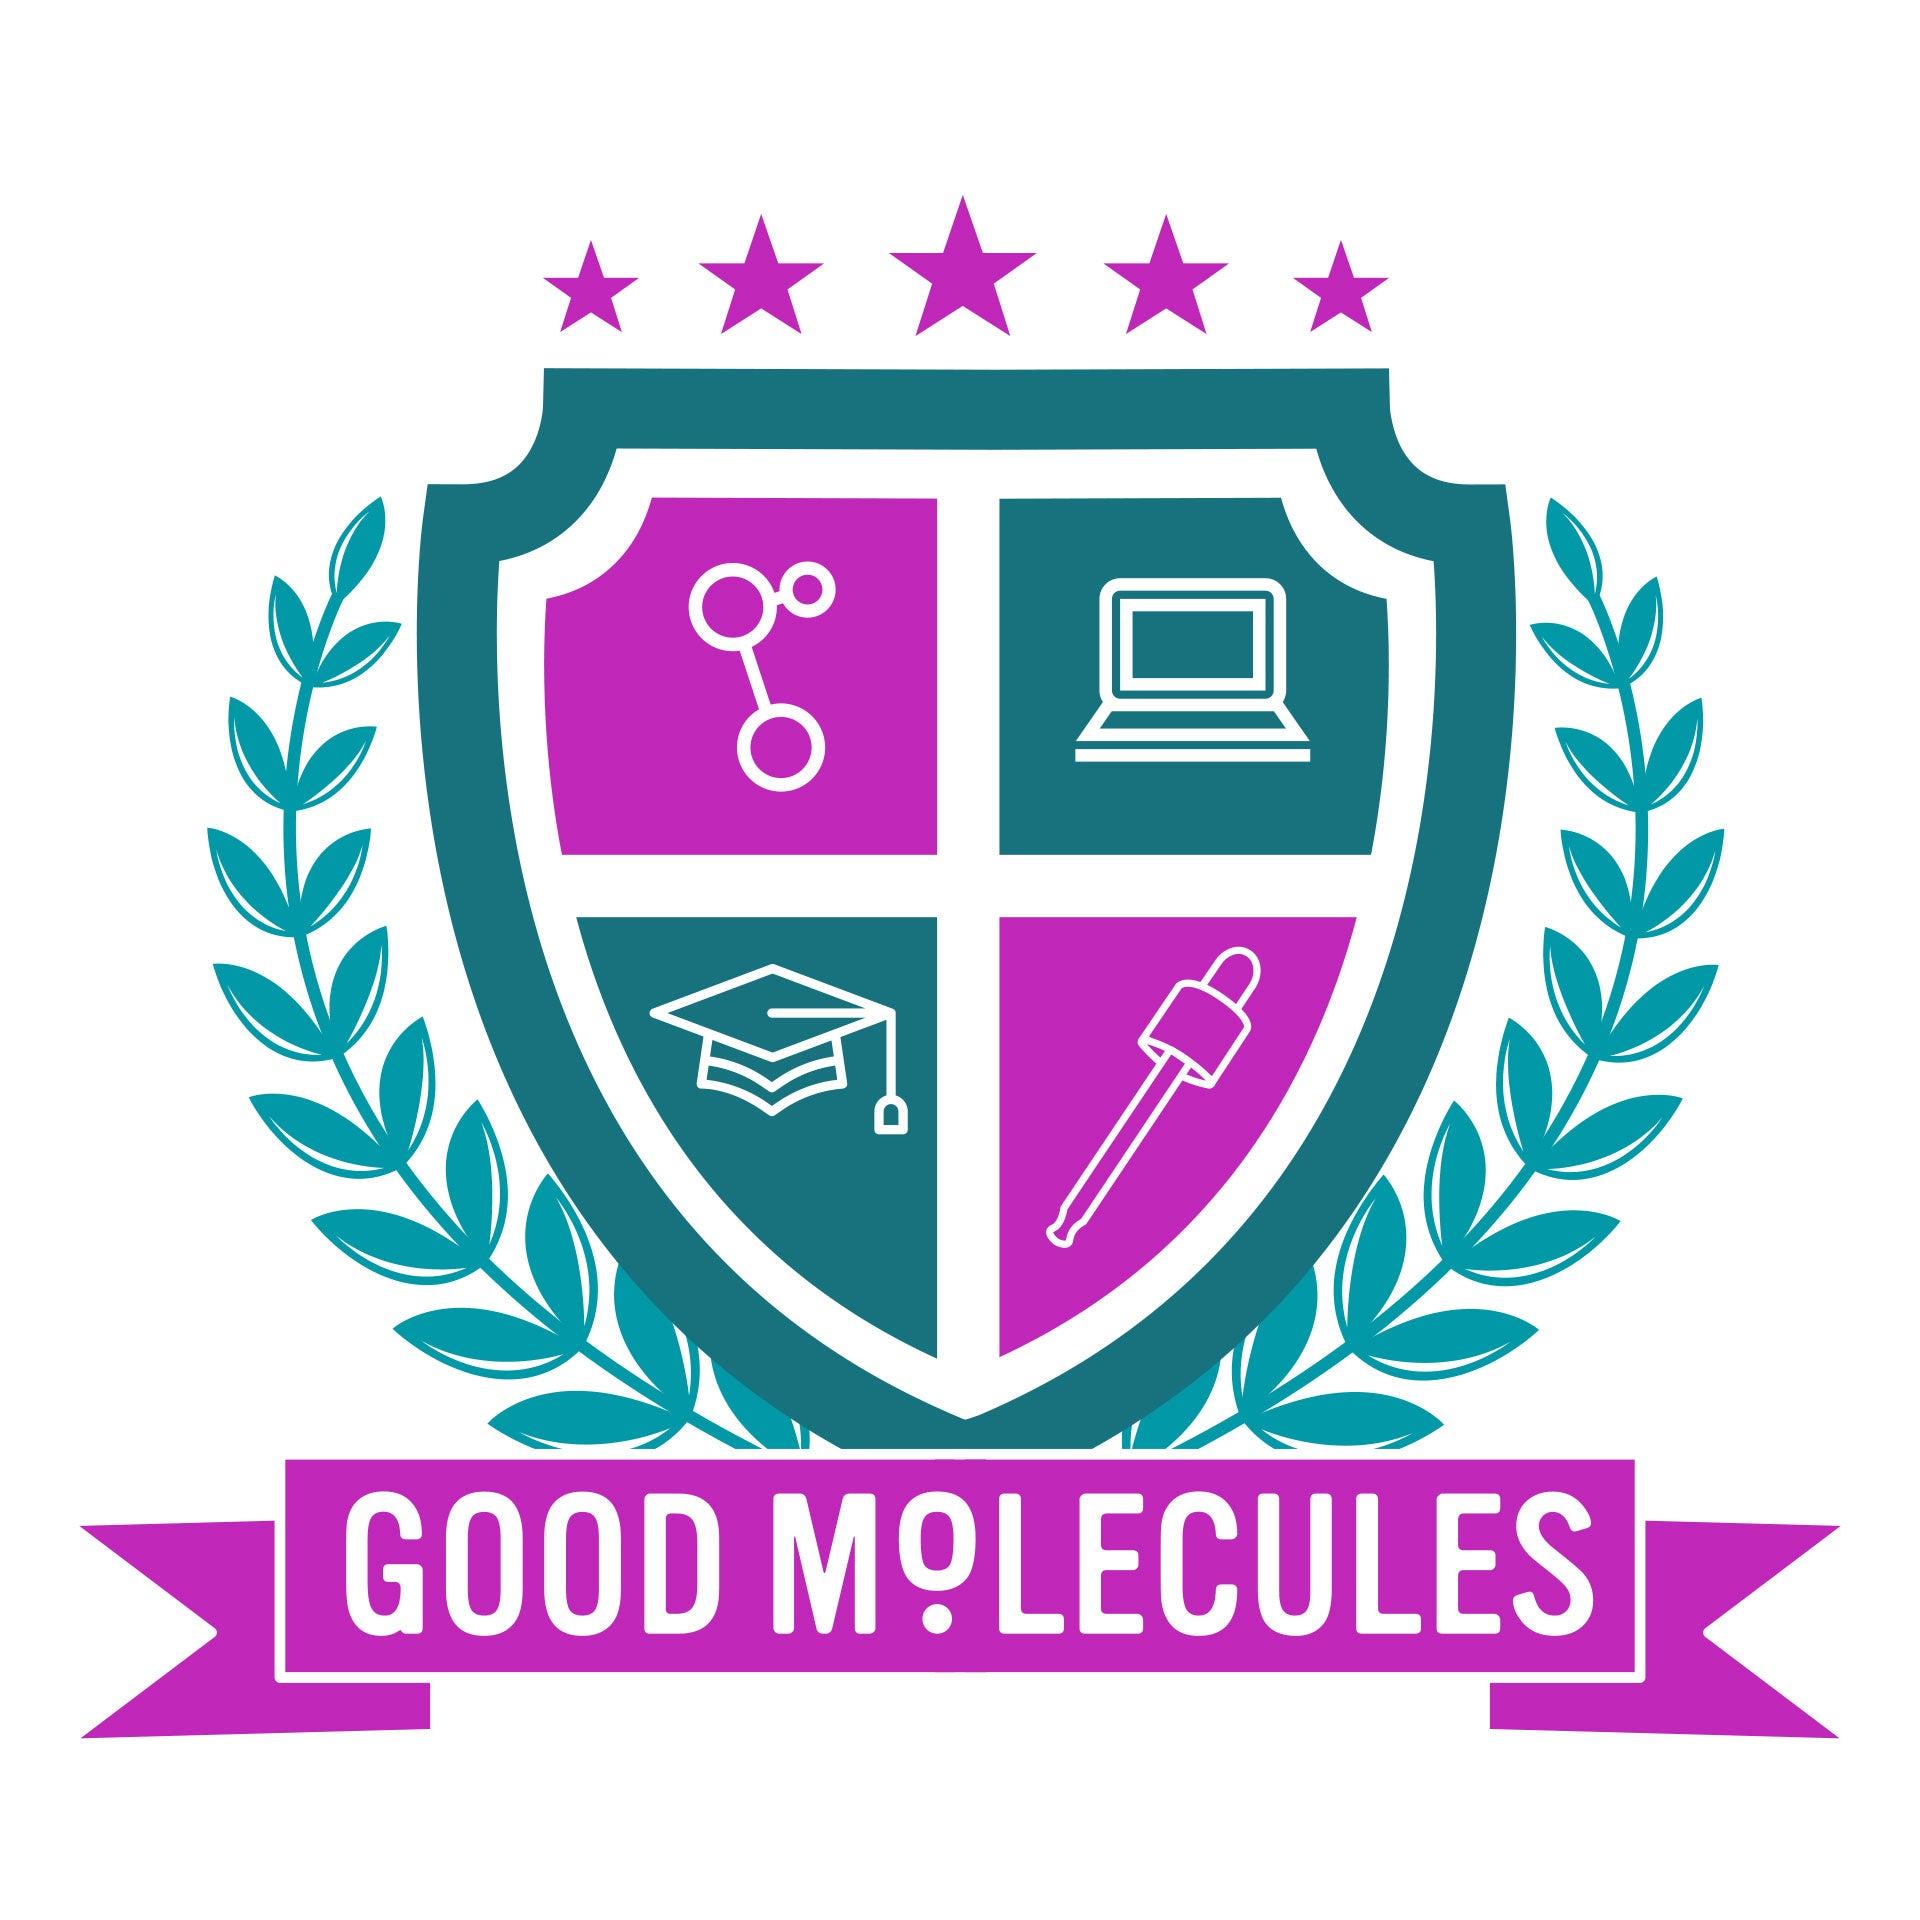 Good Molecules is coming to Syracuse University!